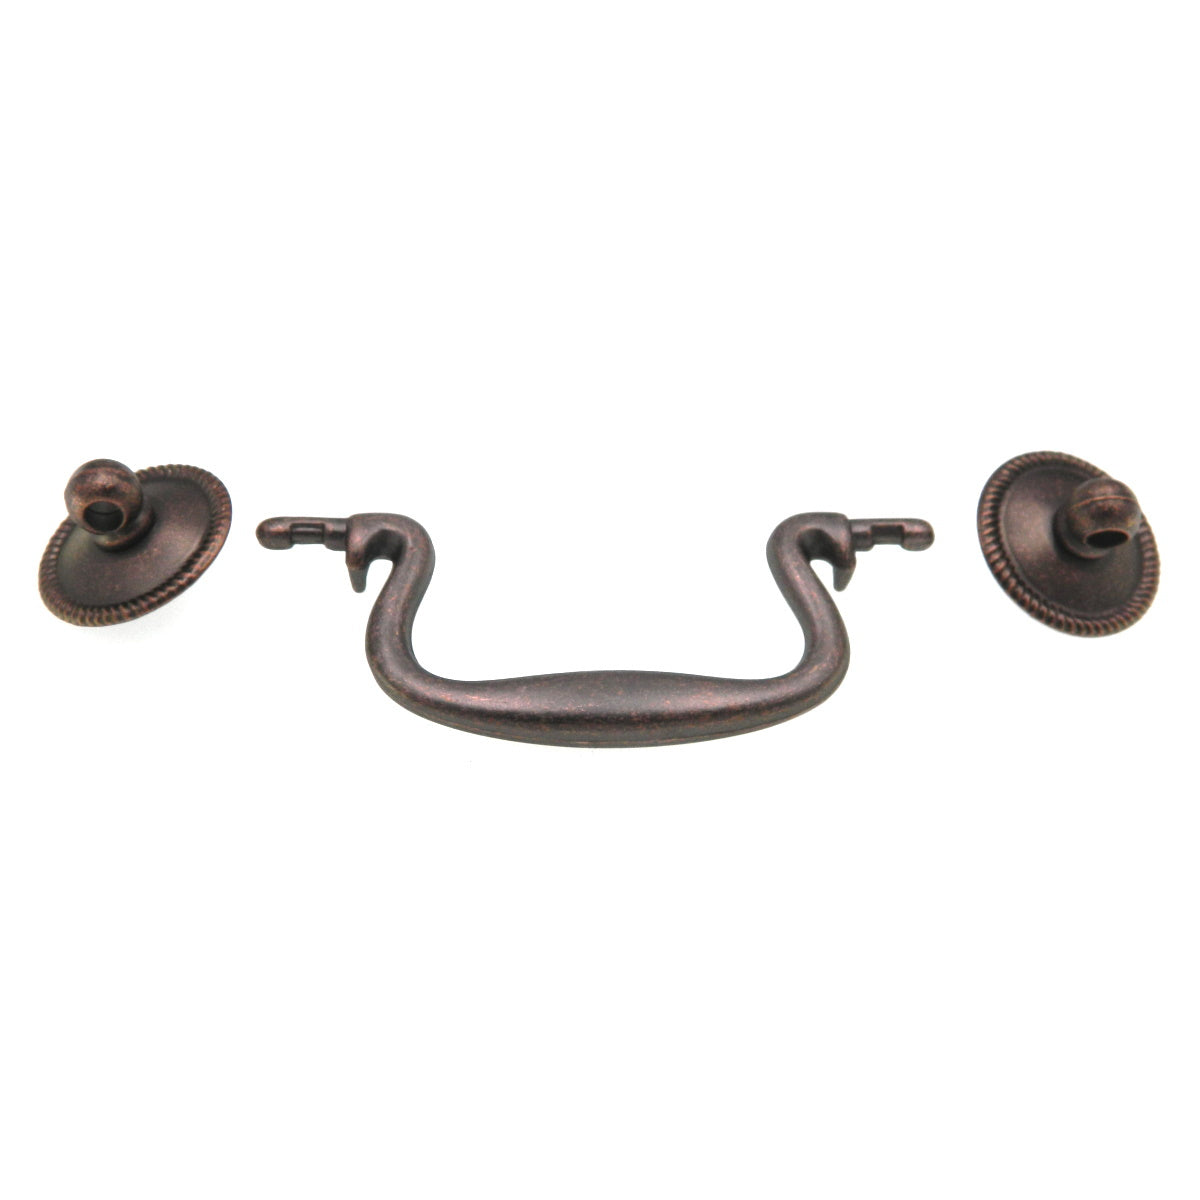 Hickory Hardware Manor House Antique Copper 3 Ctr. Drawer Bail Pull  P8049-DAC